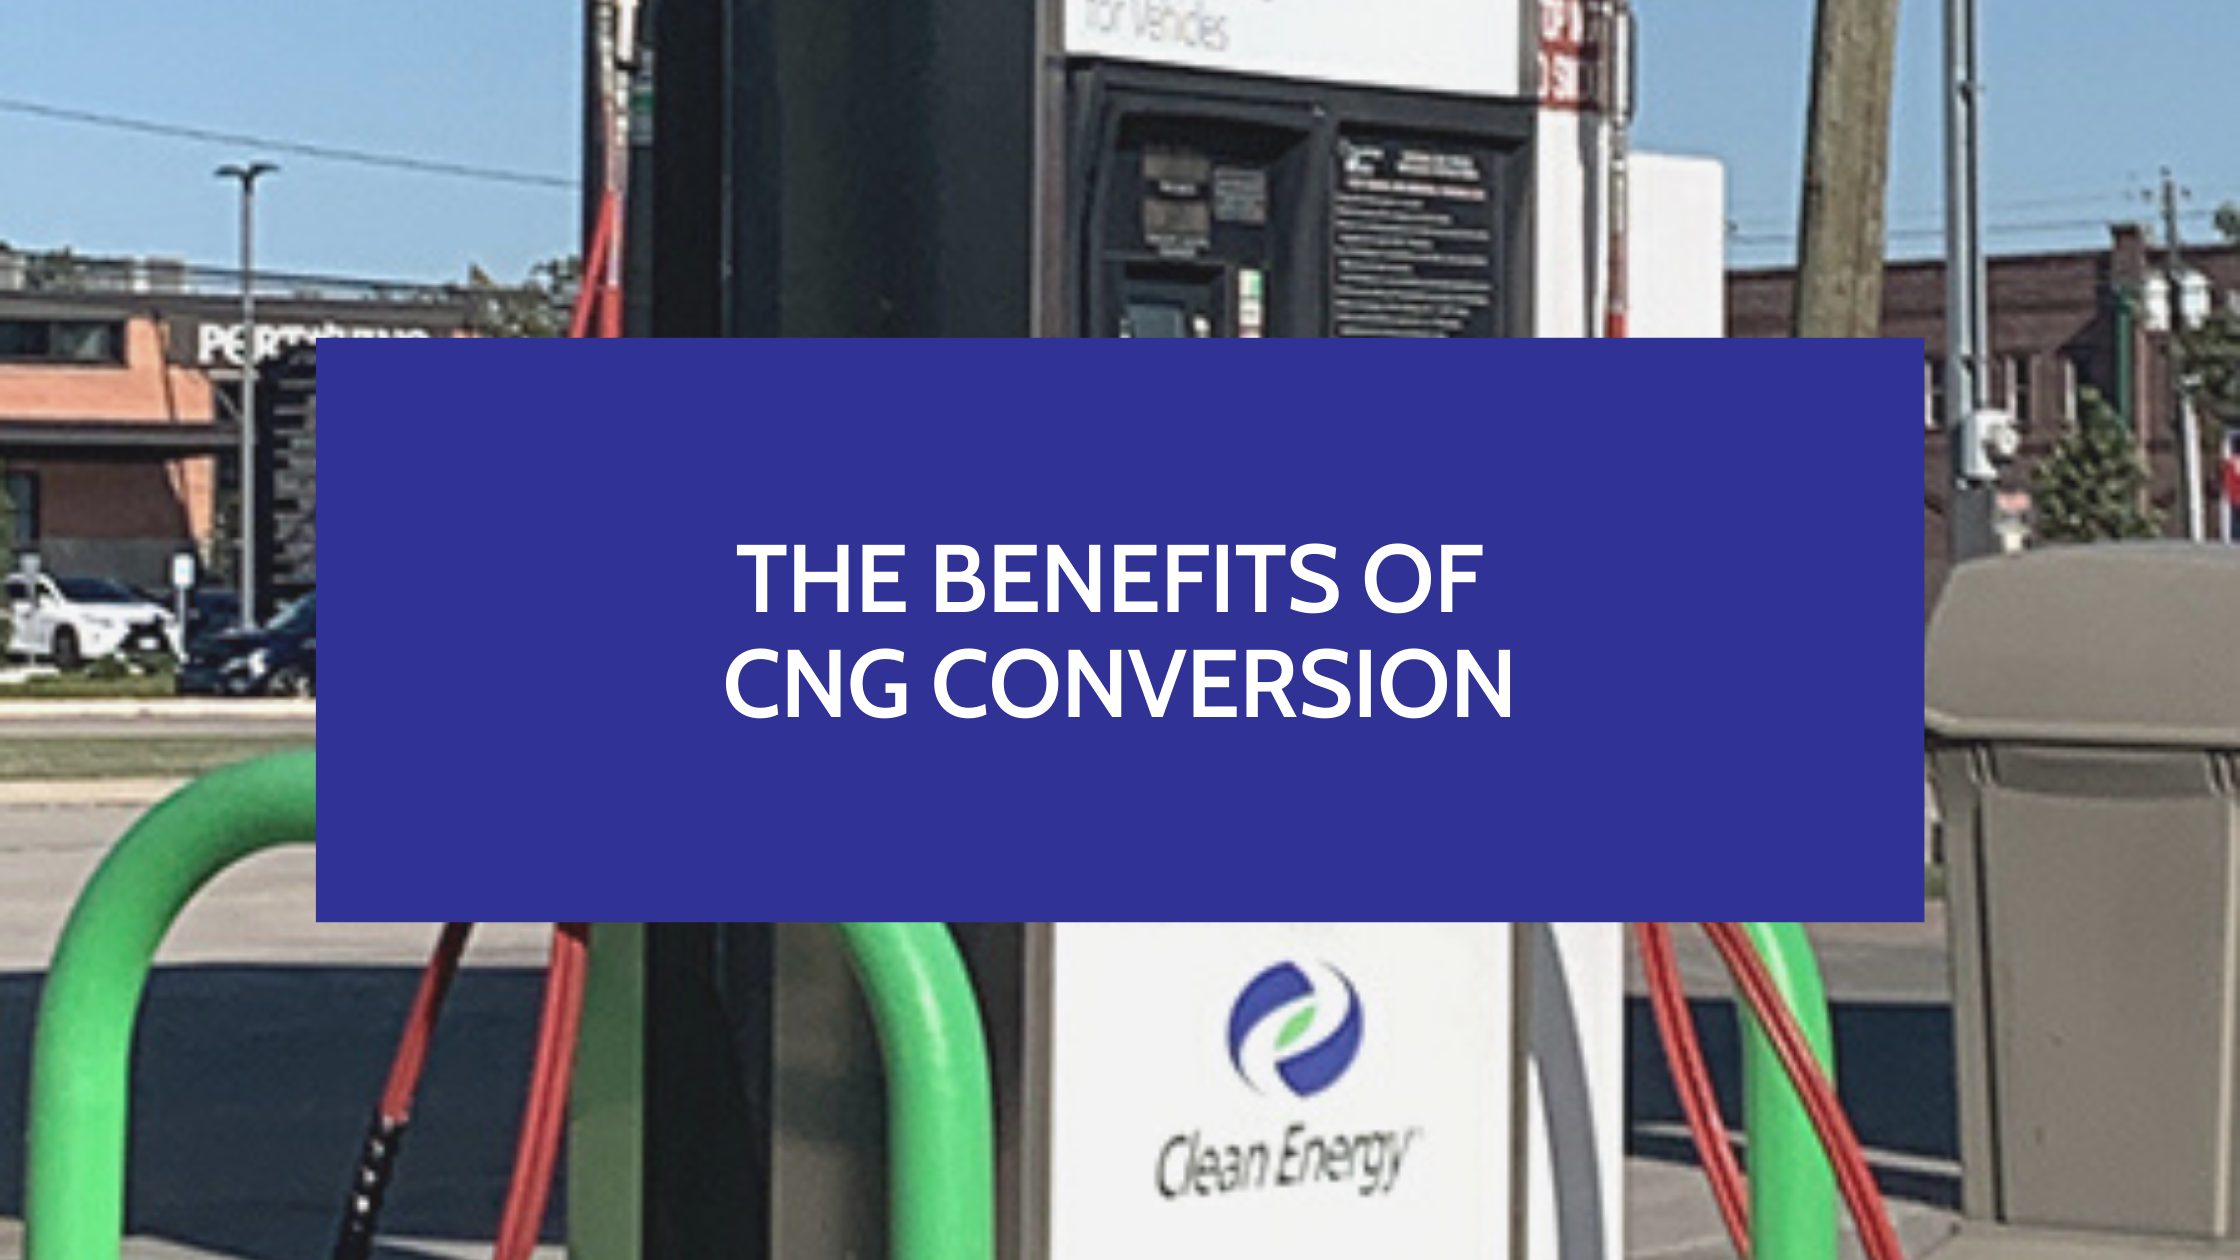 The Benefits of CNG Conversion